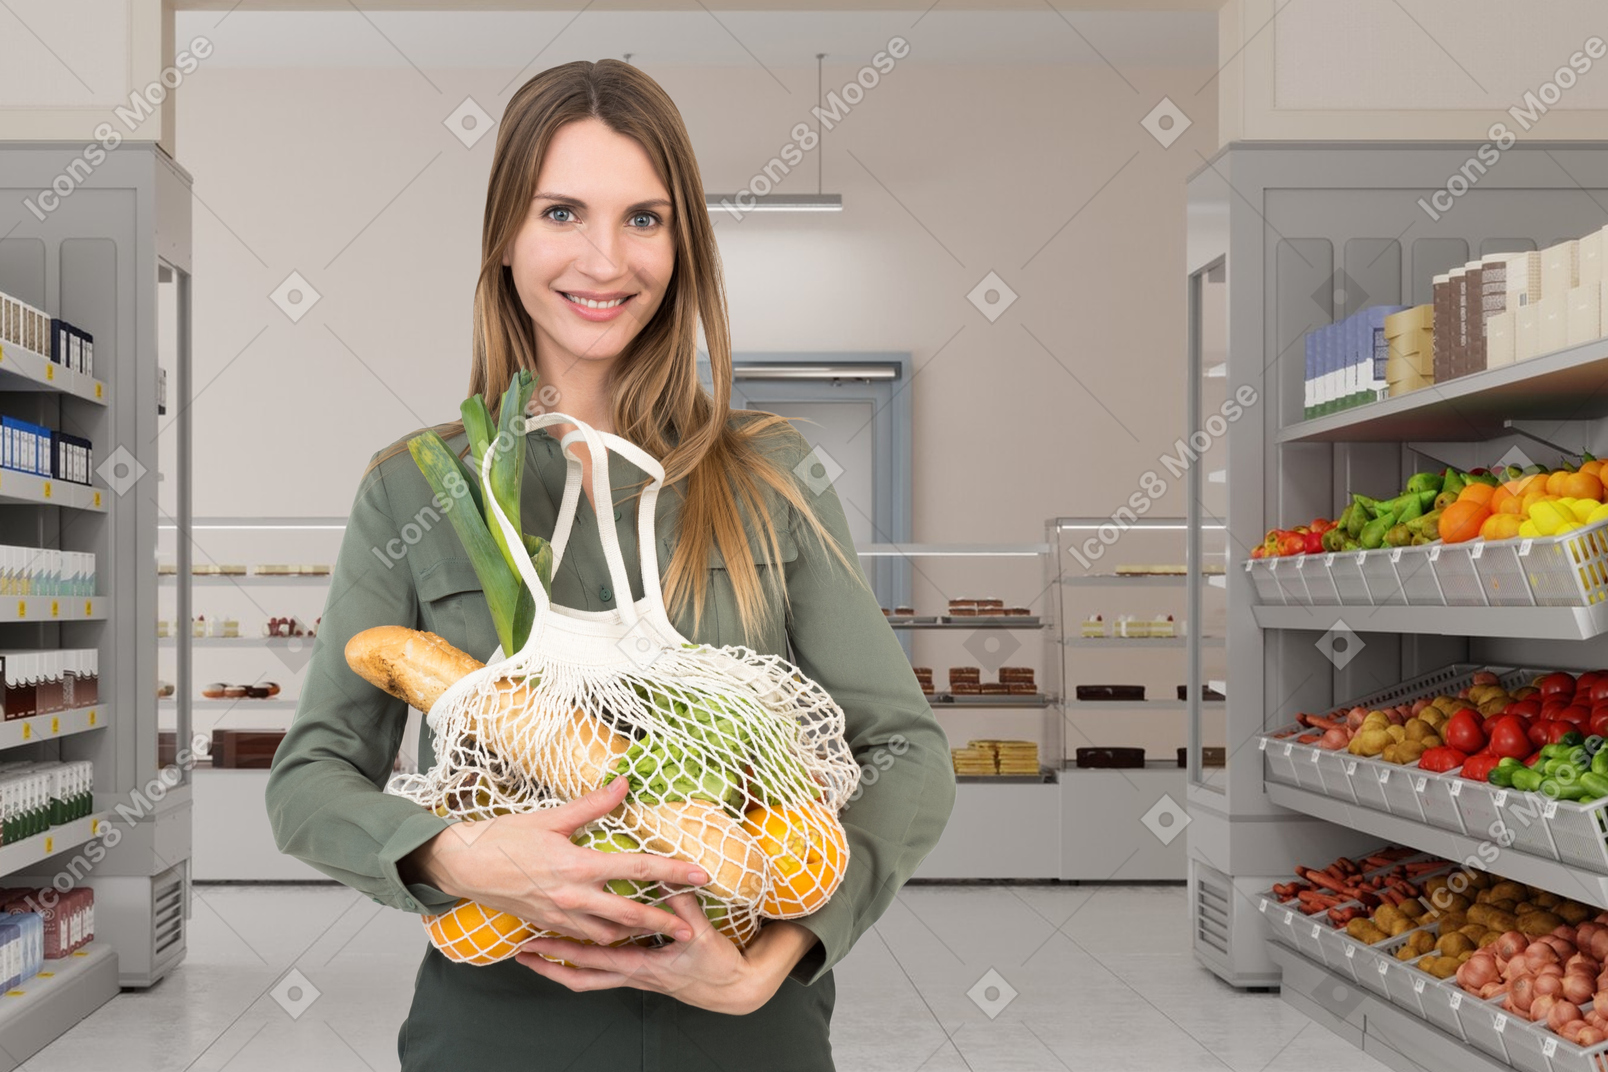 A woman holding a reusable bag of groceries in a store